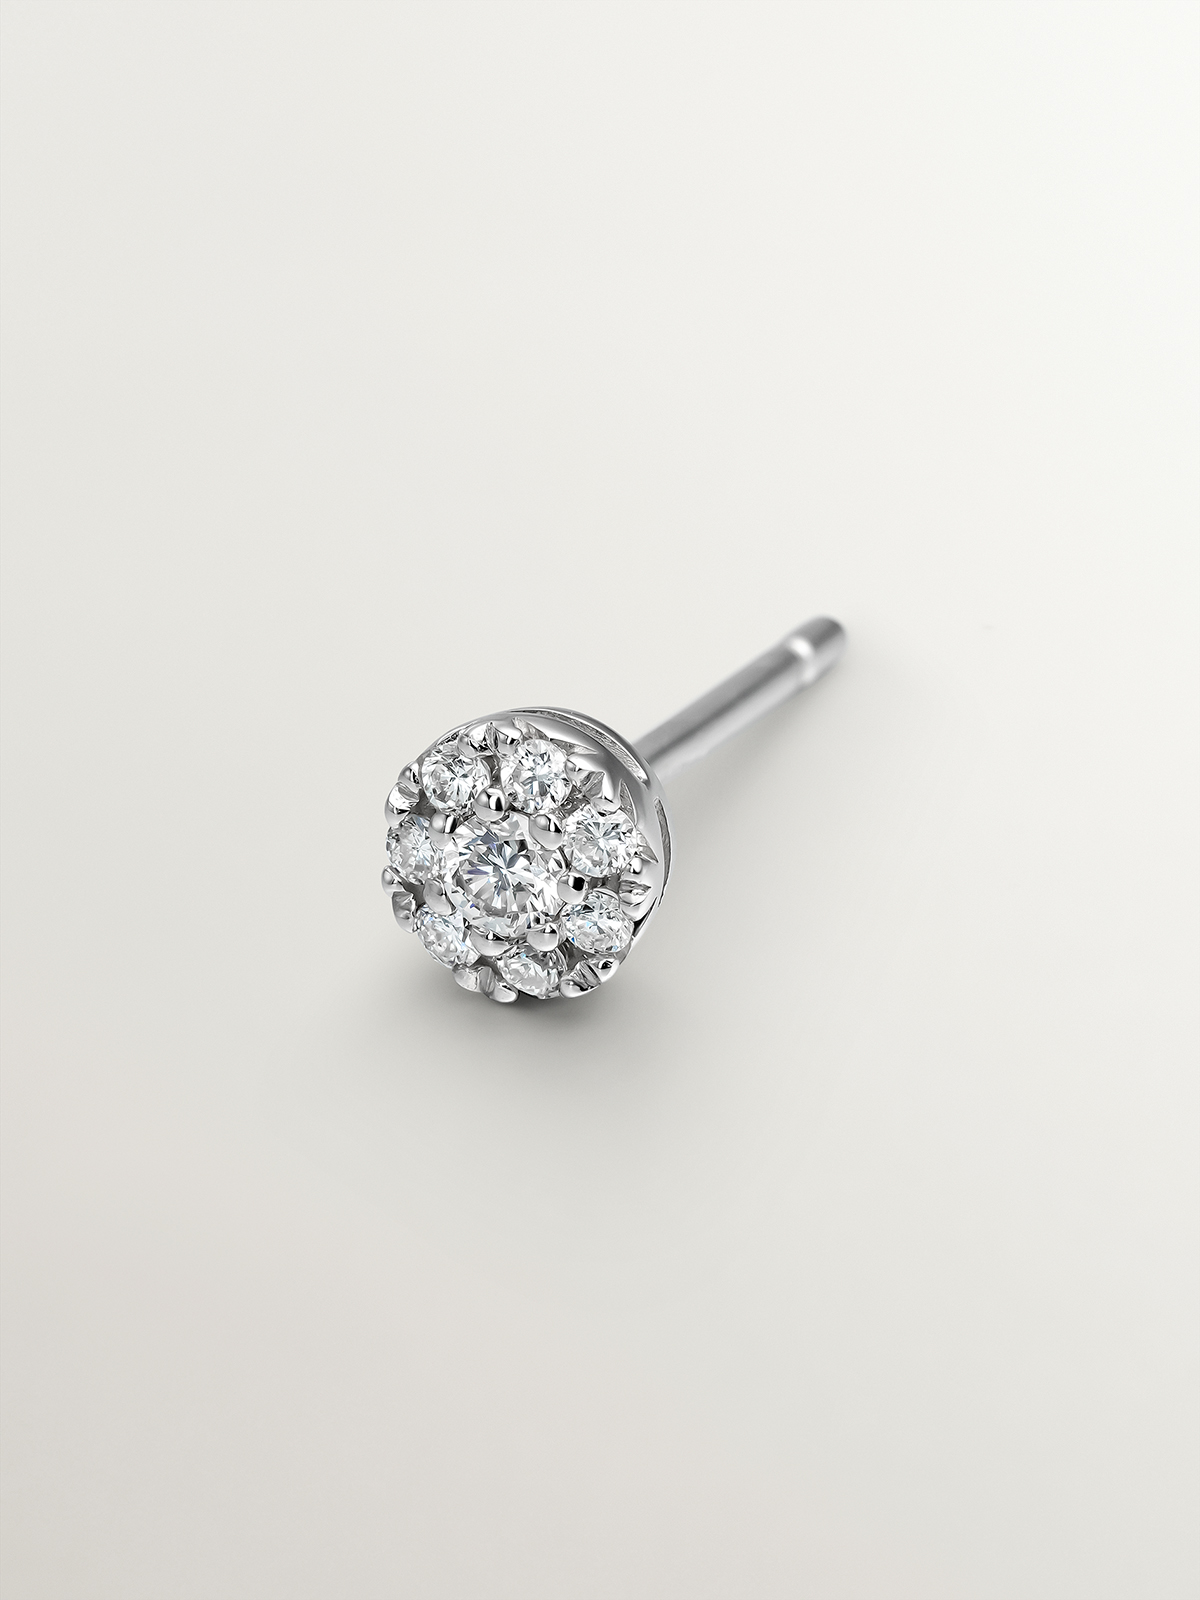 Individual 18K white gold earring with brilliant cut diamond